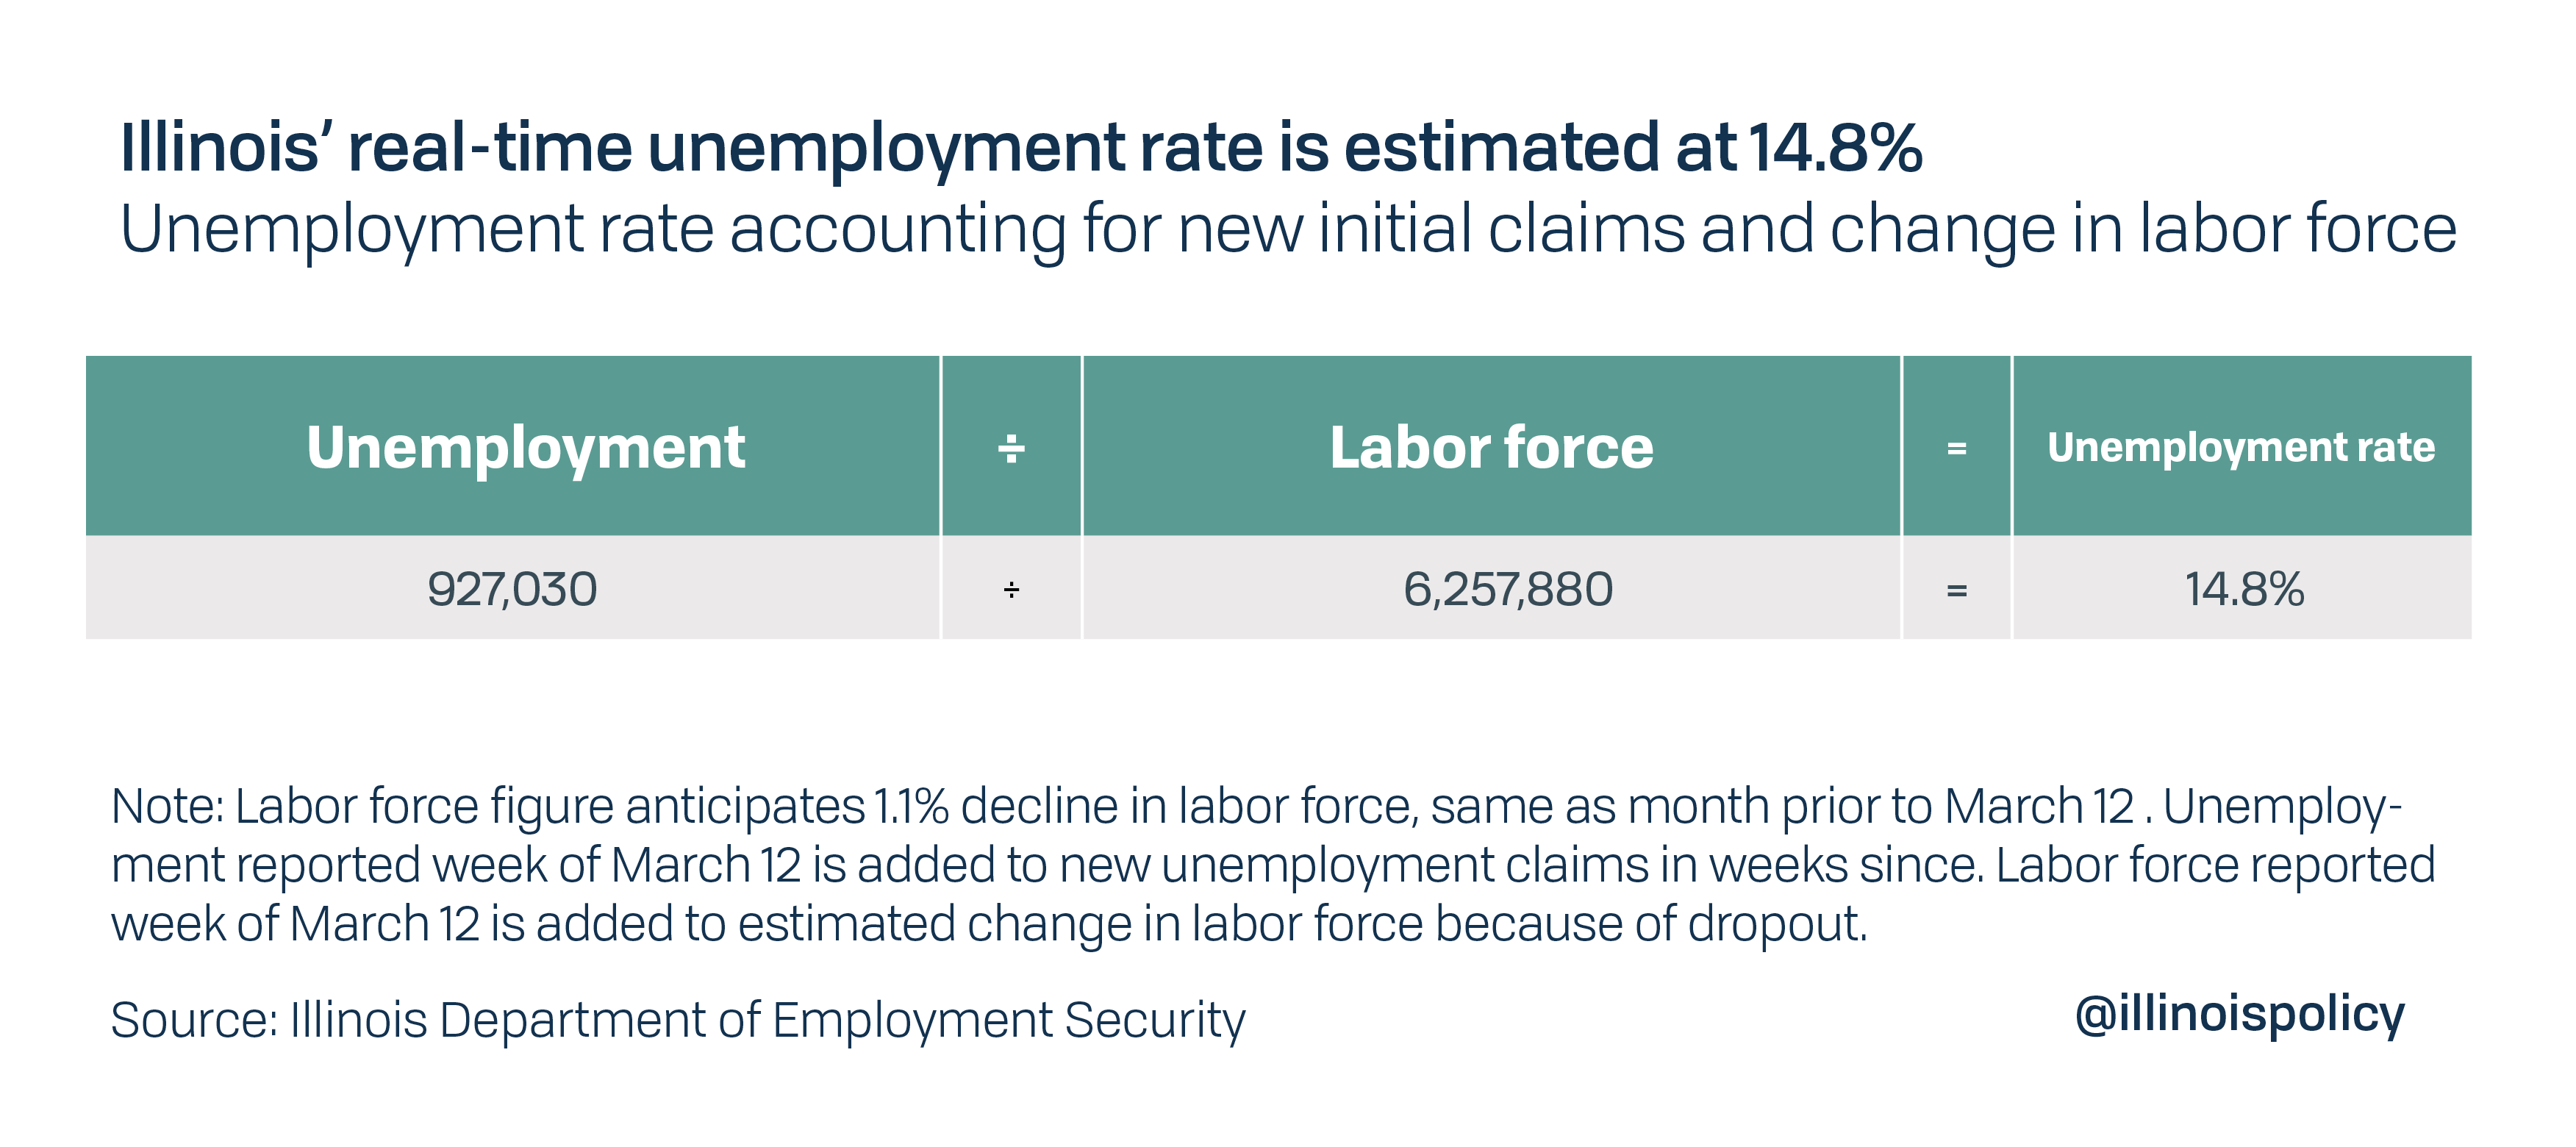 Illinois' real-time unemployment rate is estimated at 14.8%